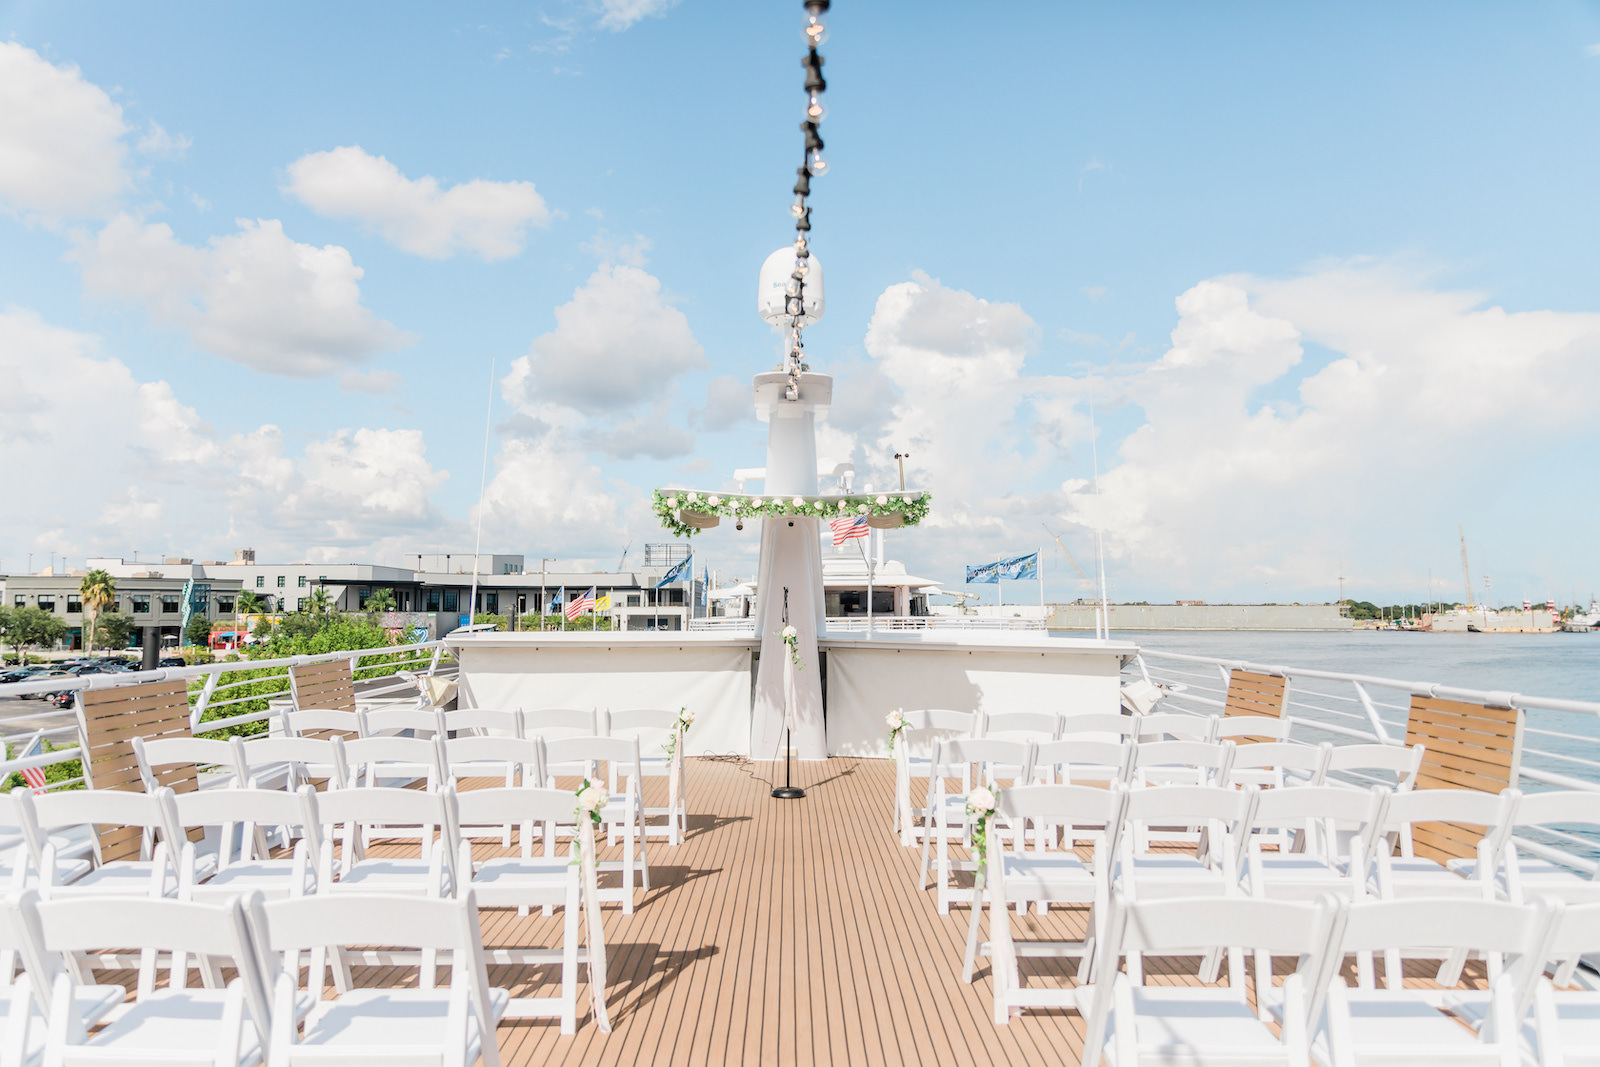 Tampa COVID Wedding at Yacht Starship Venue | Waterfront Wedding Ceremony Ship Boat Deck with White Folding Garden Chairs and Greenery Garland